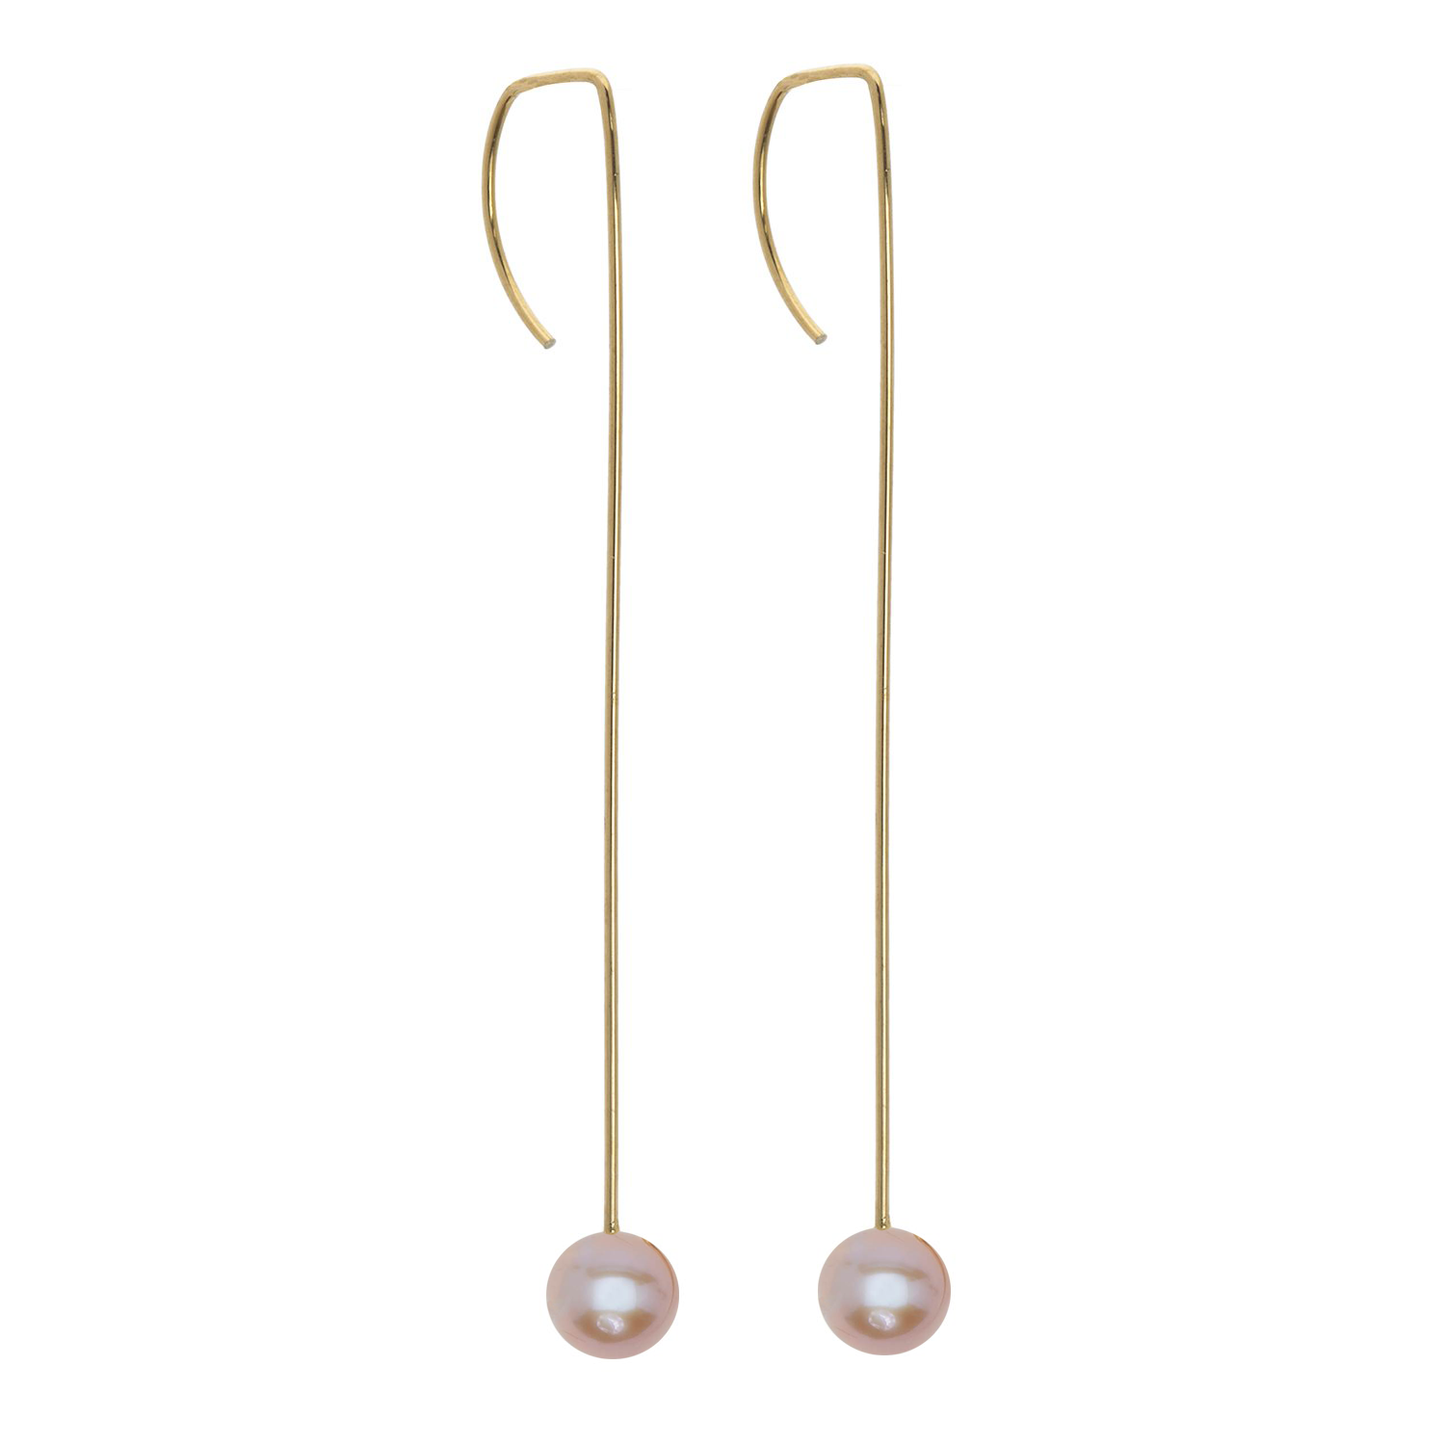 Long Straight Drop Earrings with Round Freshwater Pearls